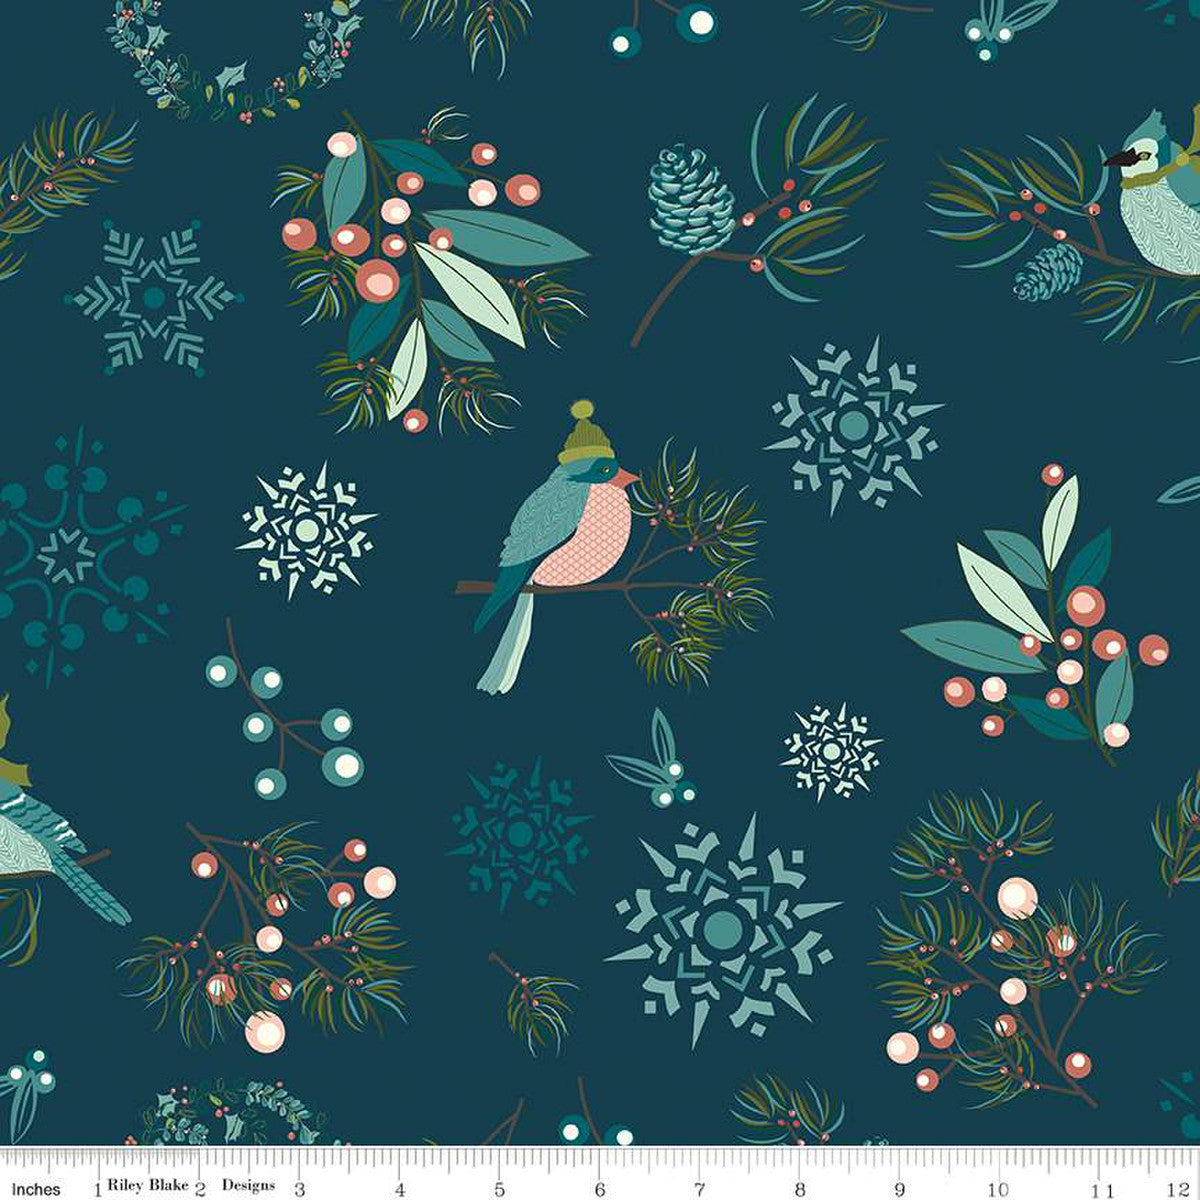 Riley Blake Fabric - Arrival of Winter Main Navy - Sandy Gervais - Cotton Fabric - Bird - Floral